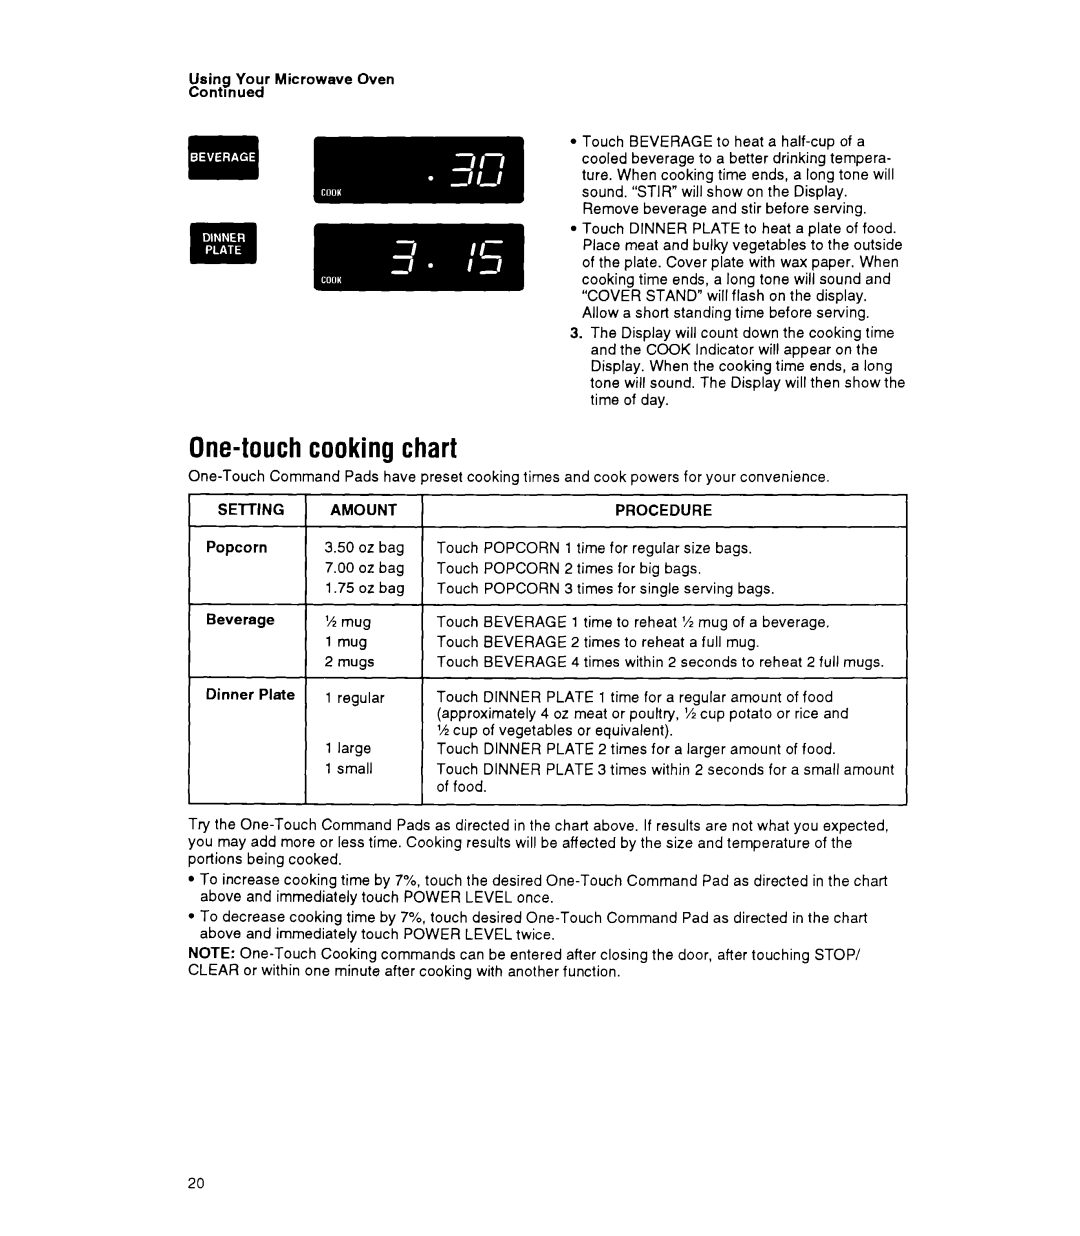 Whirlpool MT9160XY manual One-touchcooking chart 